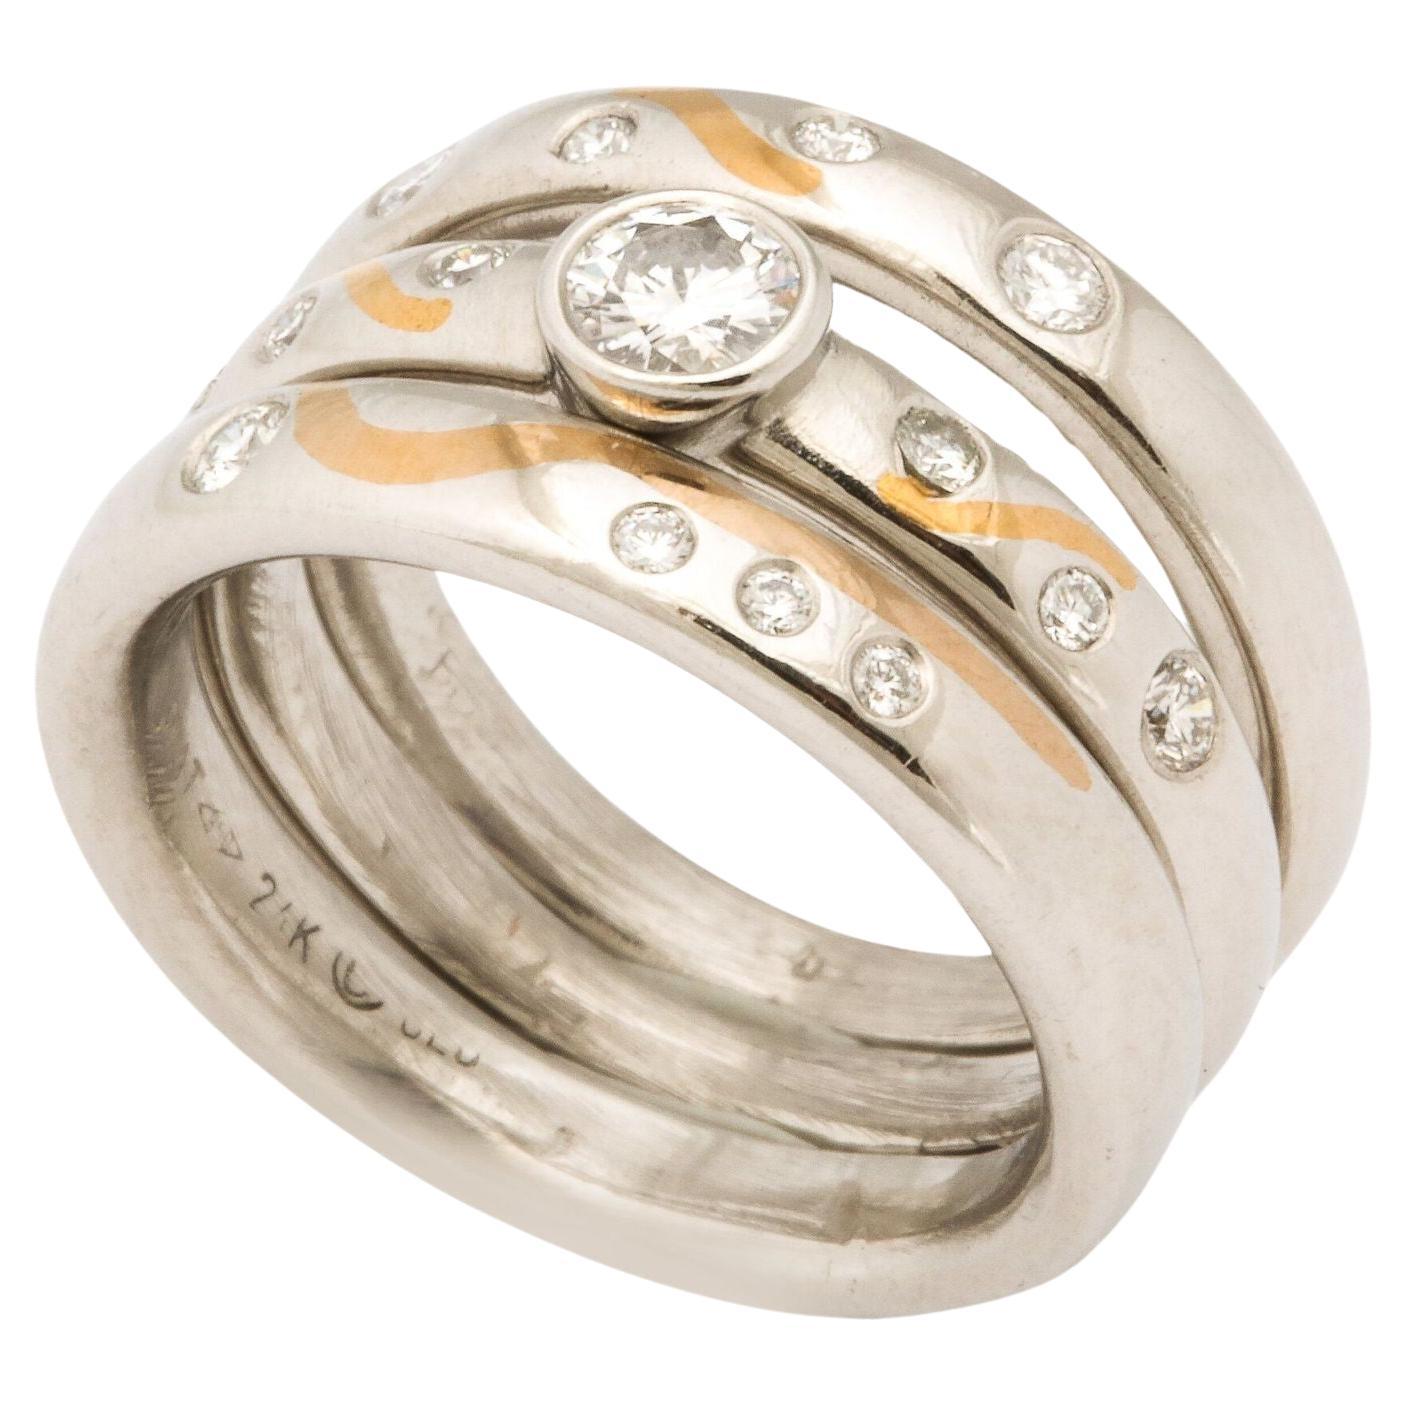 Set of Platinum Stacking Bands with Diamonds and Inlaid Gold For Sale